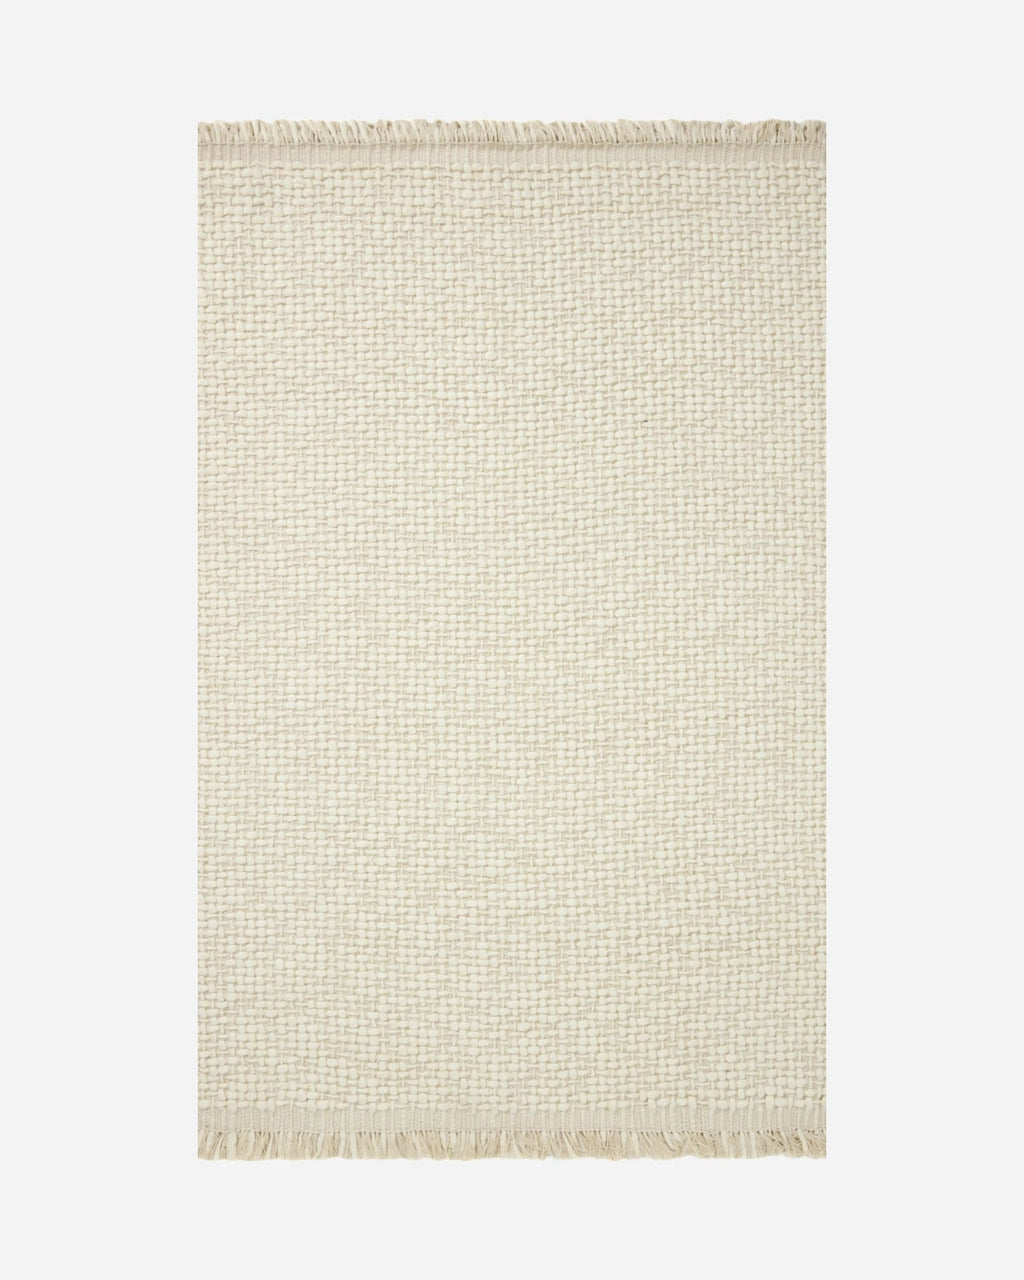 YELLOWSTONE Ivory - OVERSTOCK RÉCUPÉRATION MAGASIN - Maison Olive - Tapis